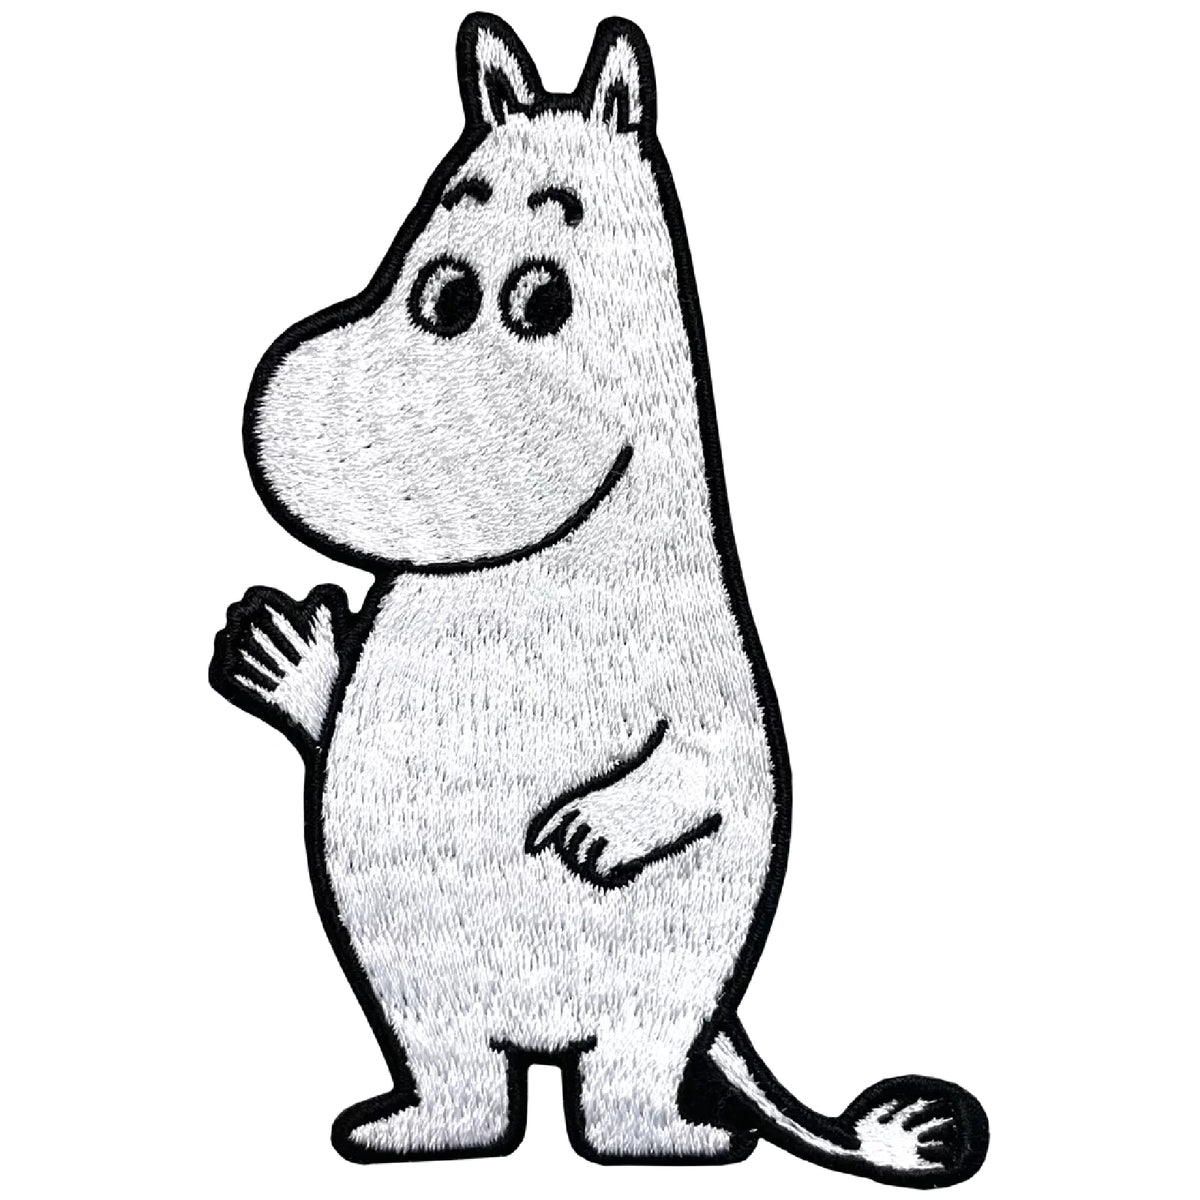 Moomintroll Sew On Patch